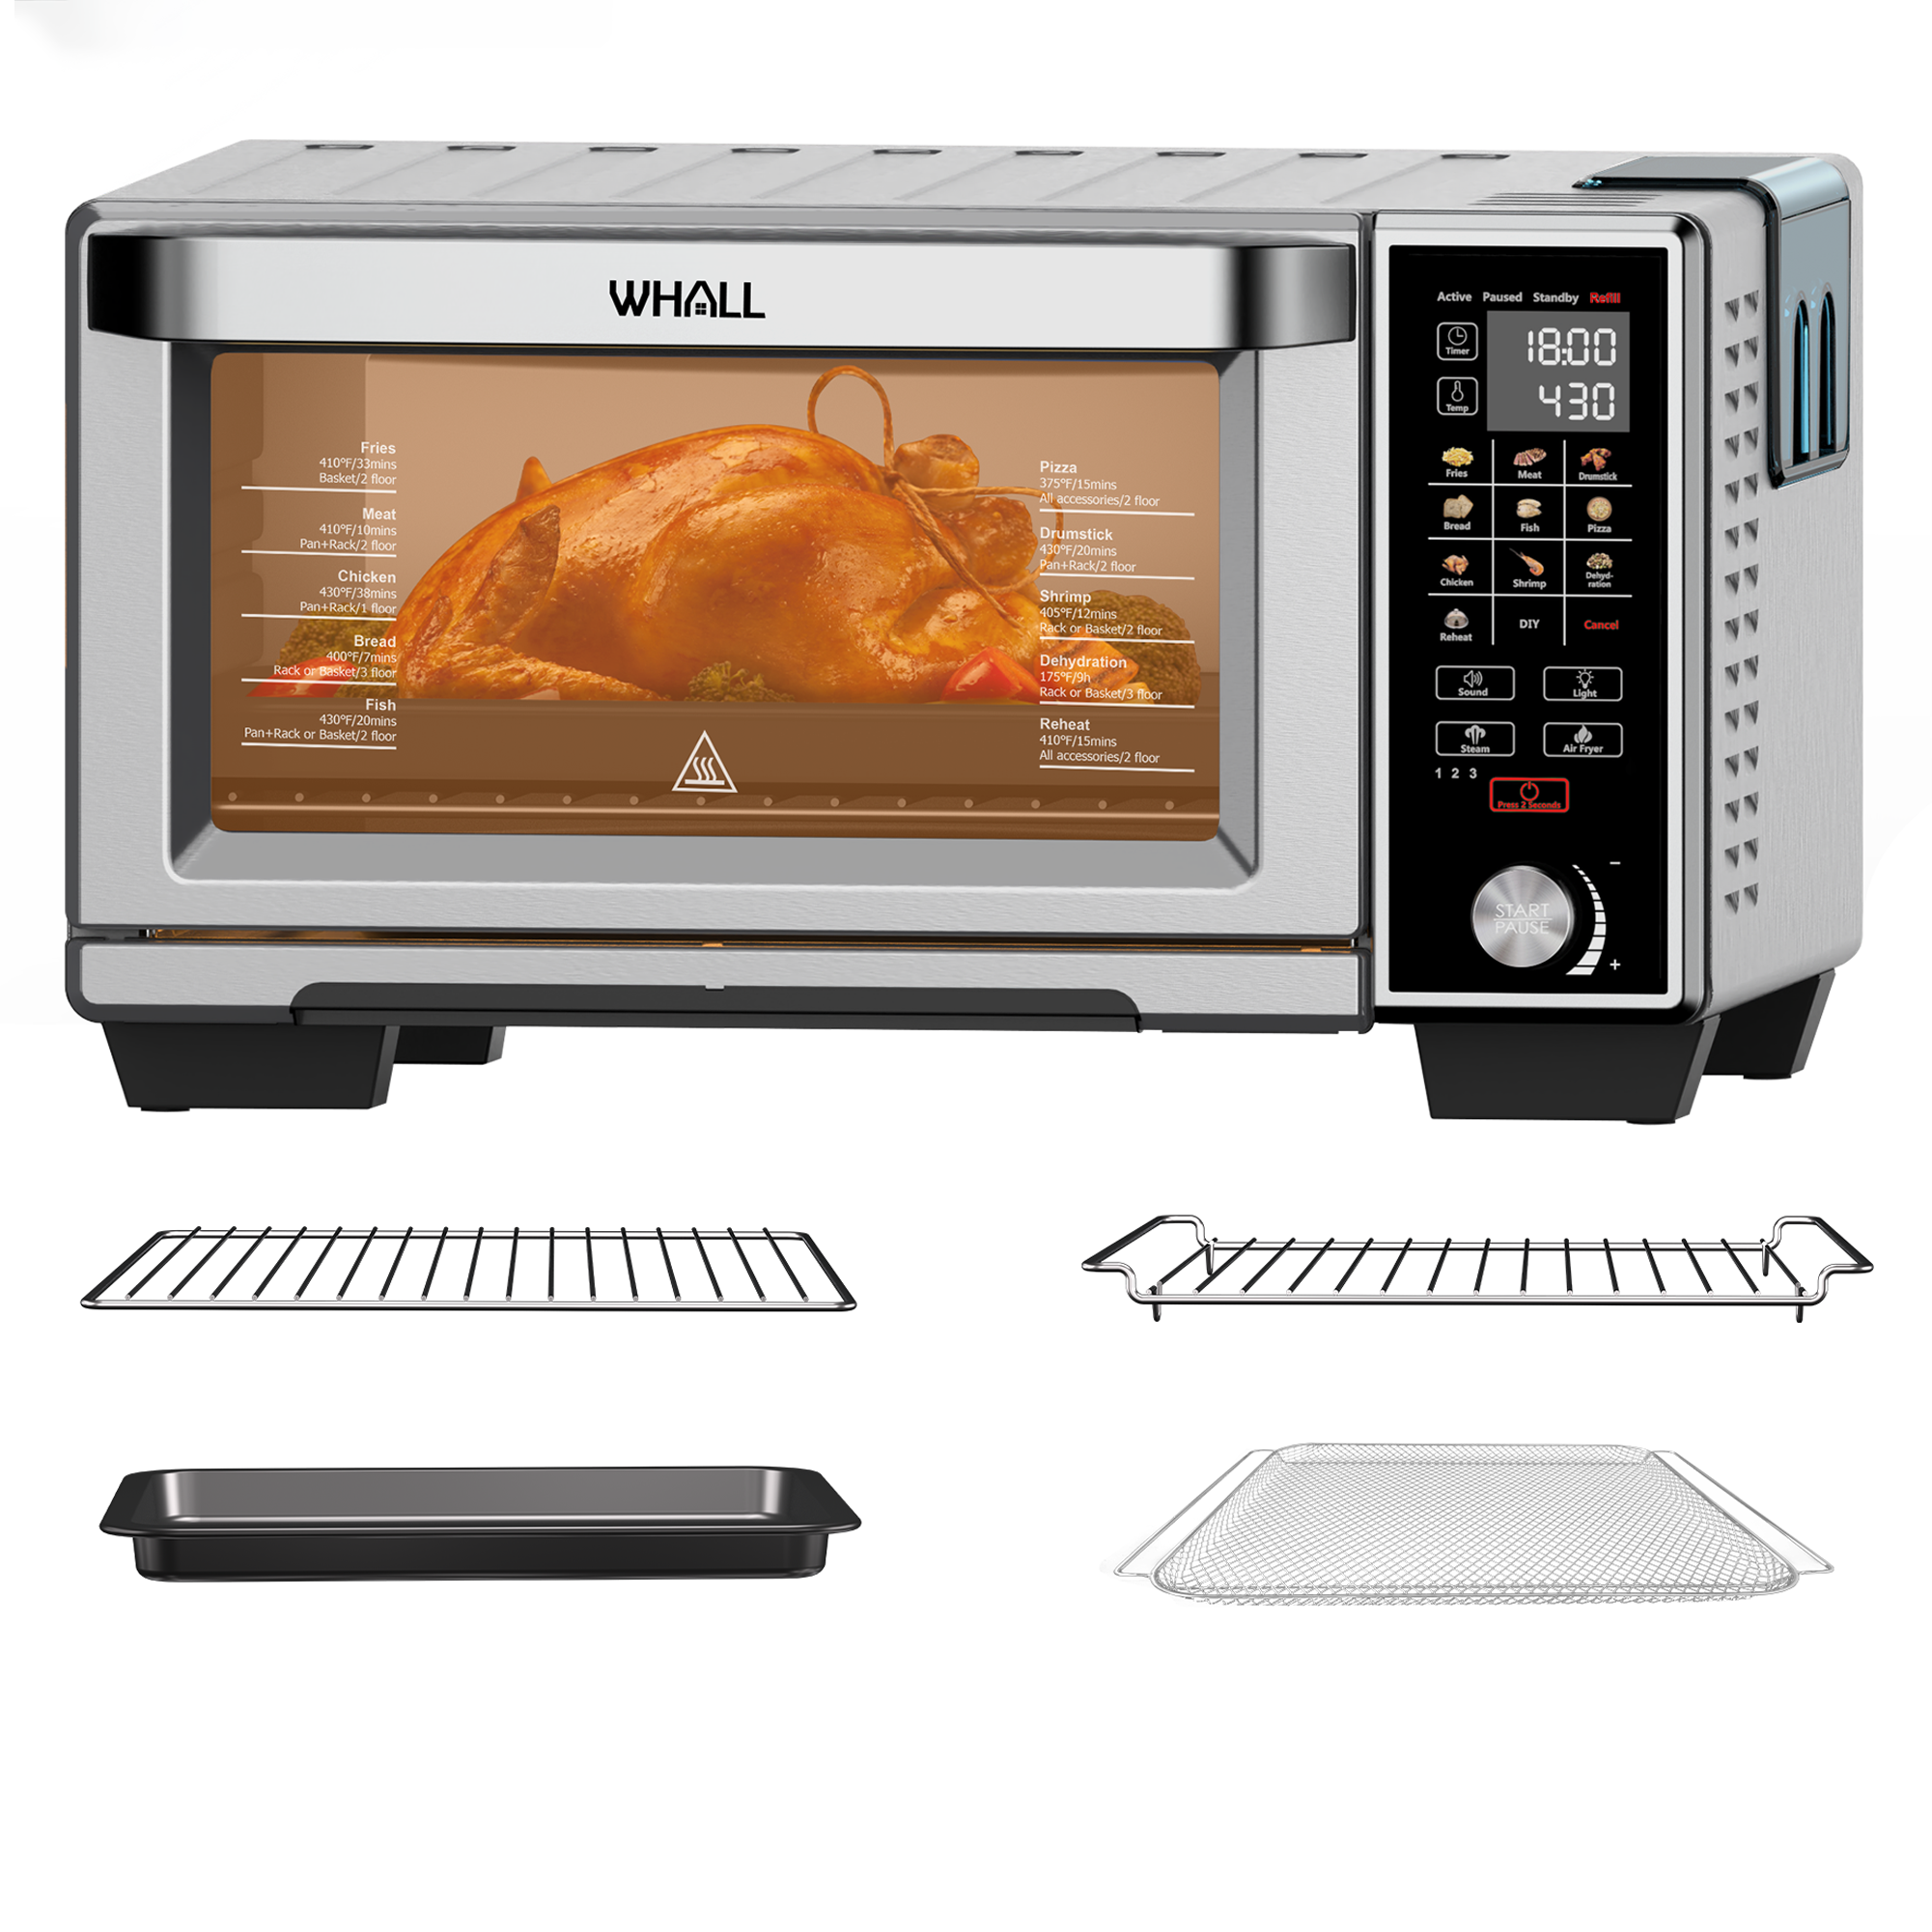 WHALL Air Fryer Oven - 30QT Stainless Steel Smart Convection Toaster Oven with Steam Function, Touchscreen,